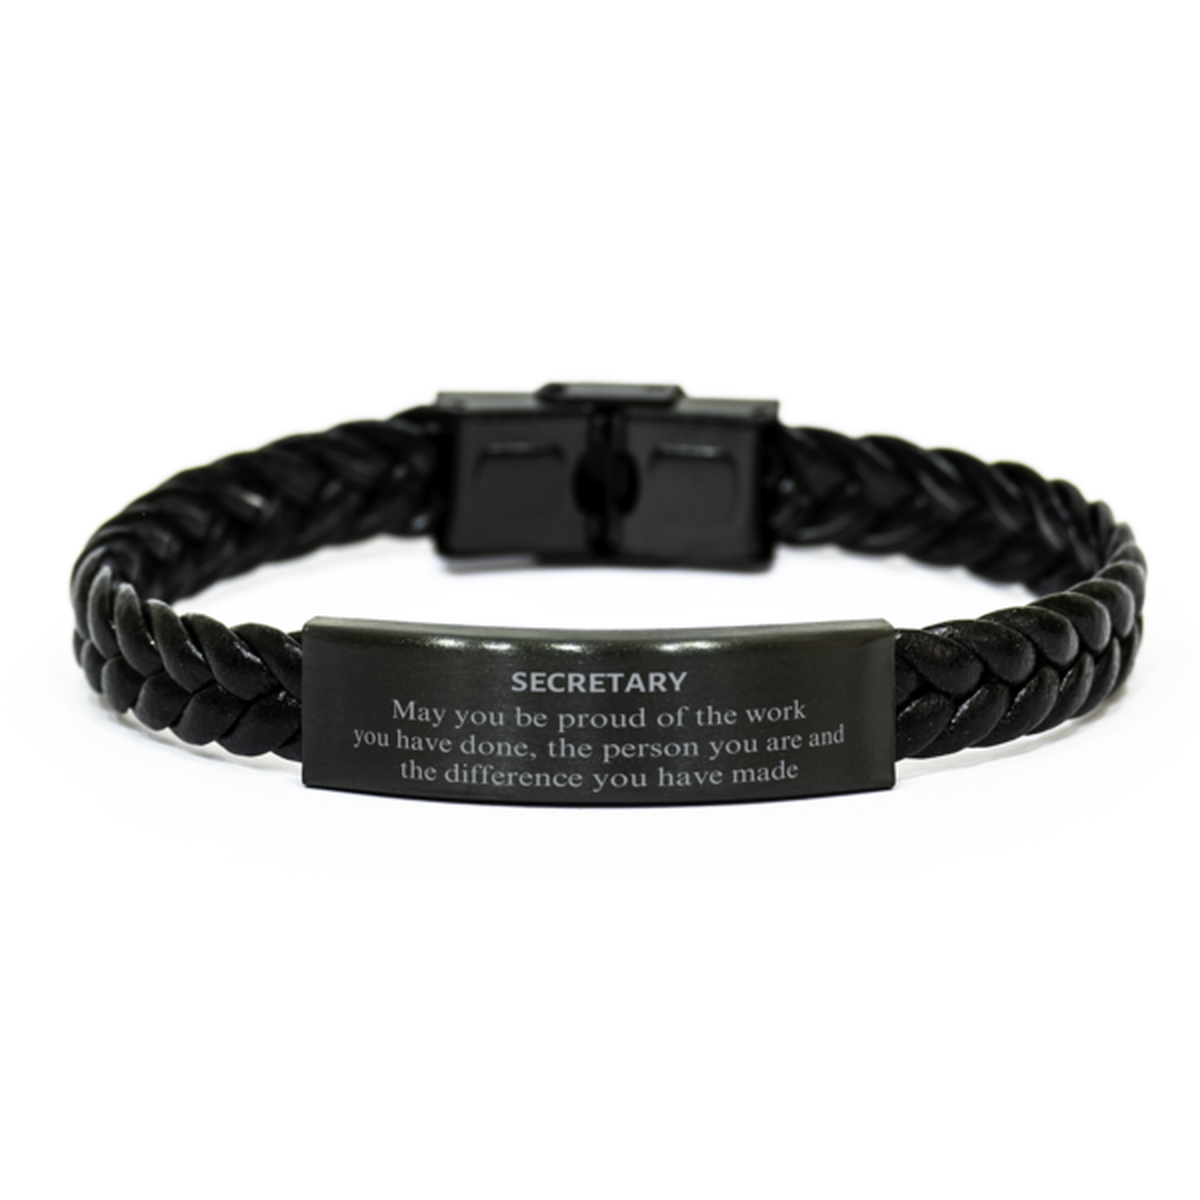 Secretary May you be proud of the work you have done, Retirement Secretary Braided Leather Bracelet for Colleague Appreciation Gifts Amazing for Secretary